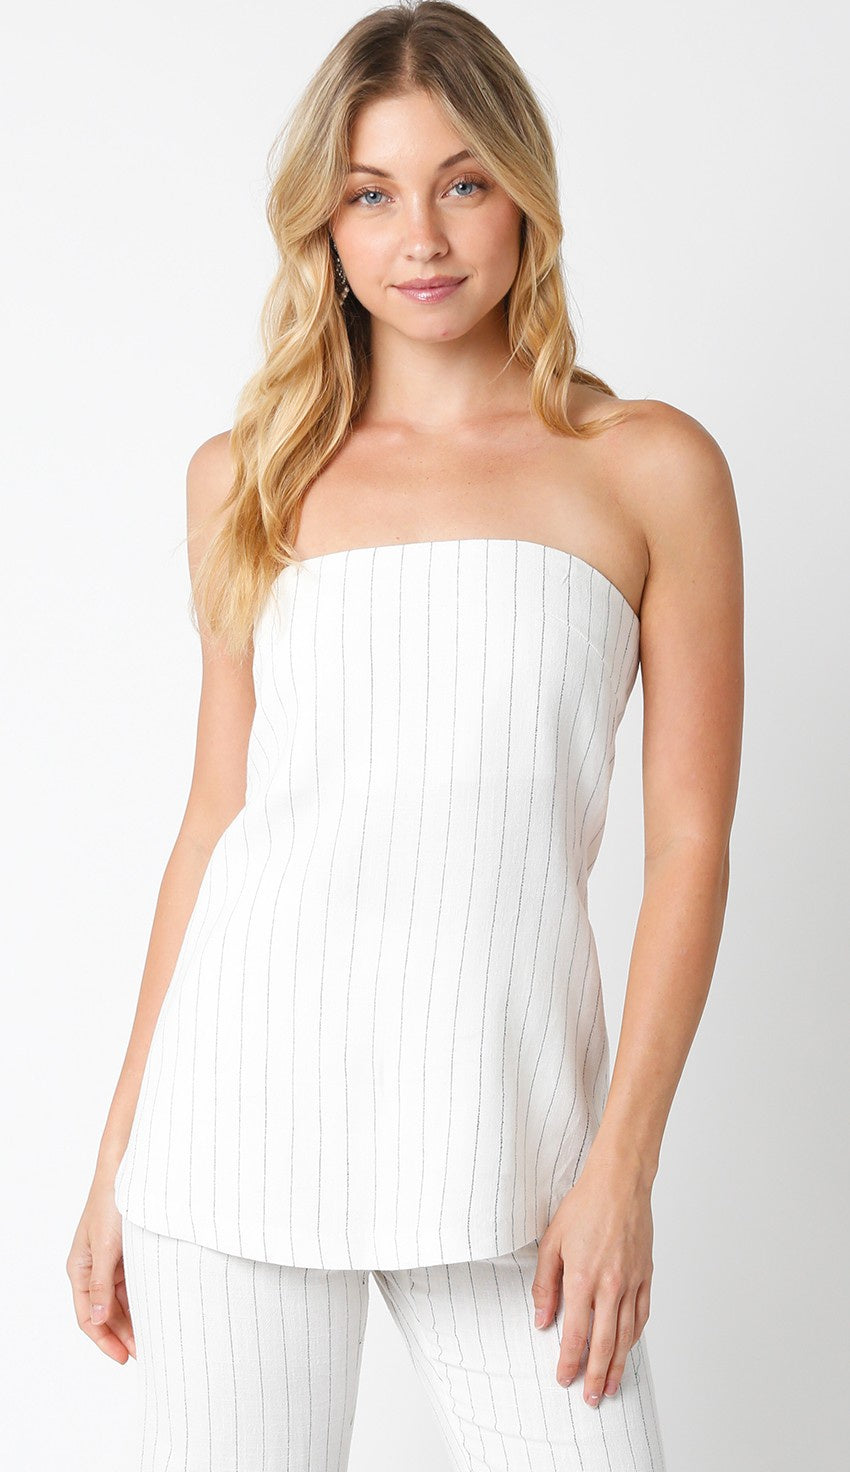 Featuring a strapless striped top with a zip up back in the color ivory and black